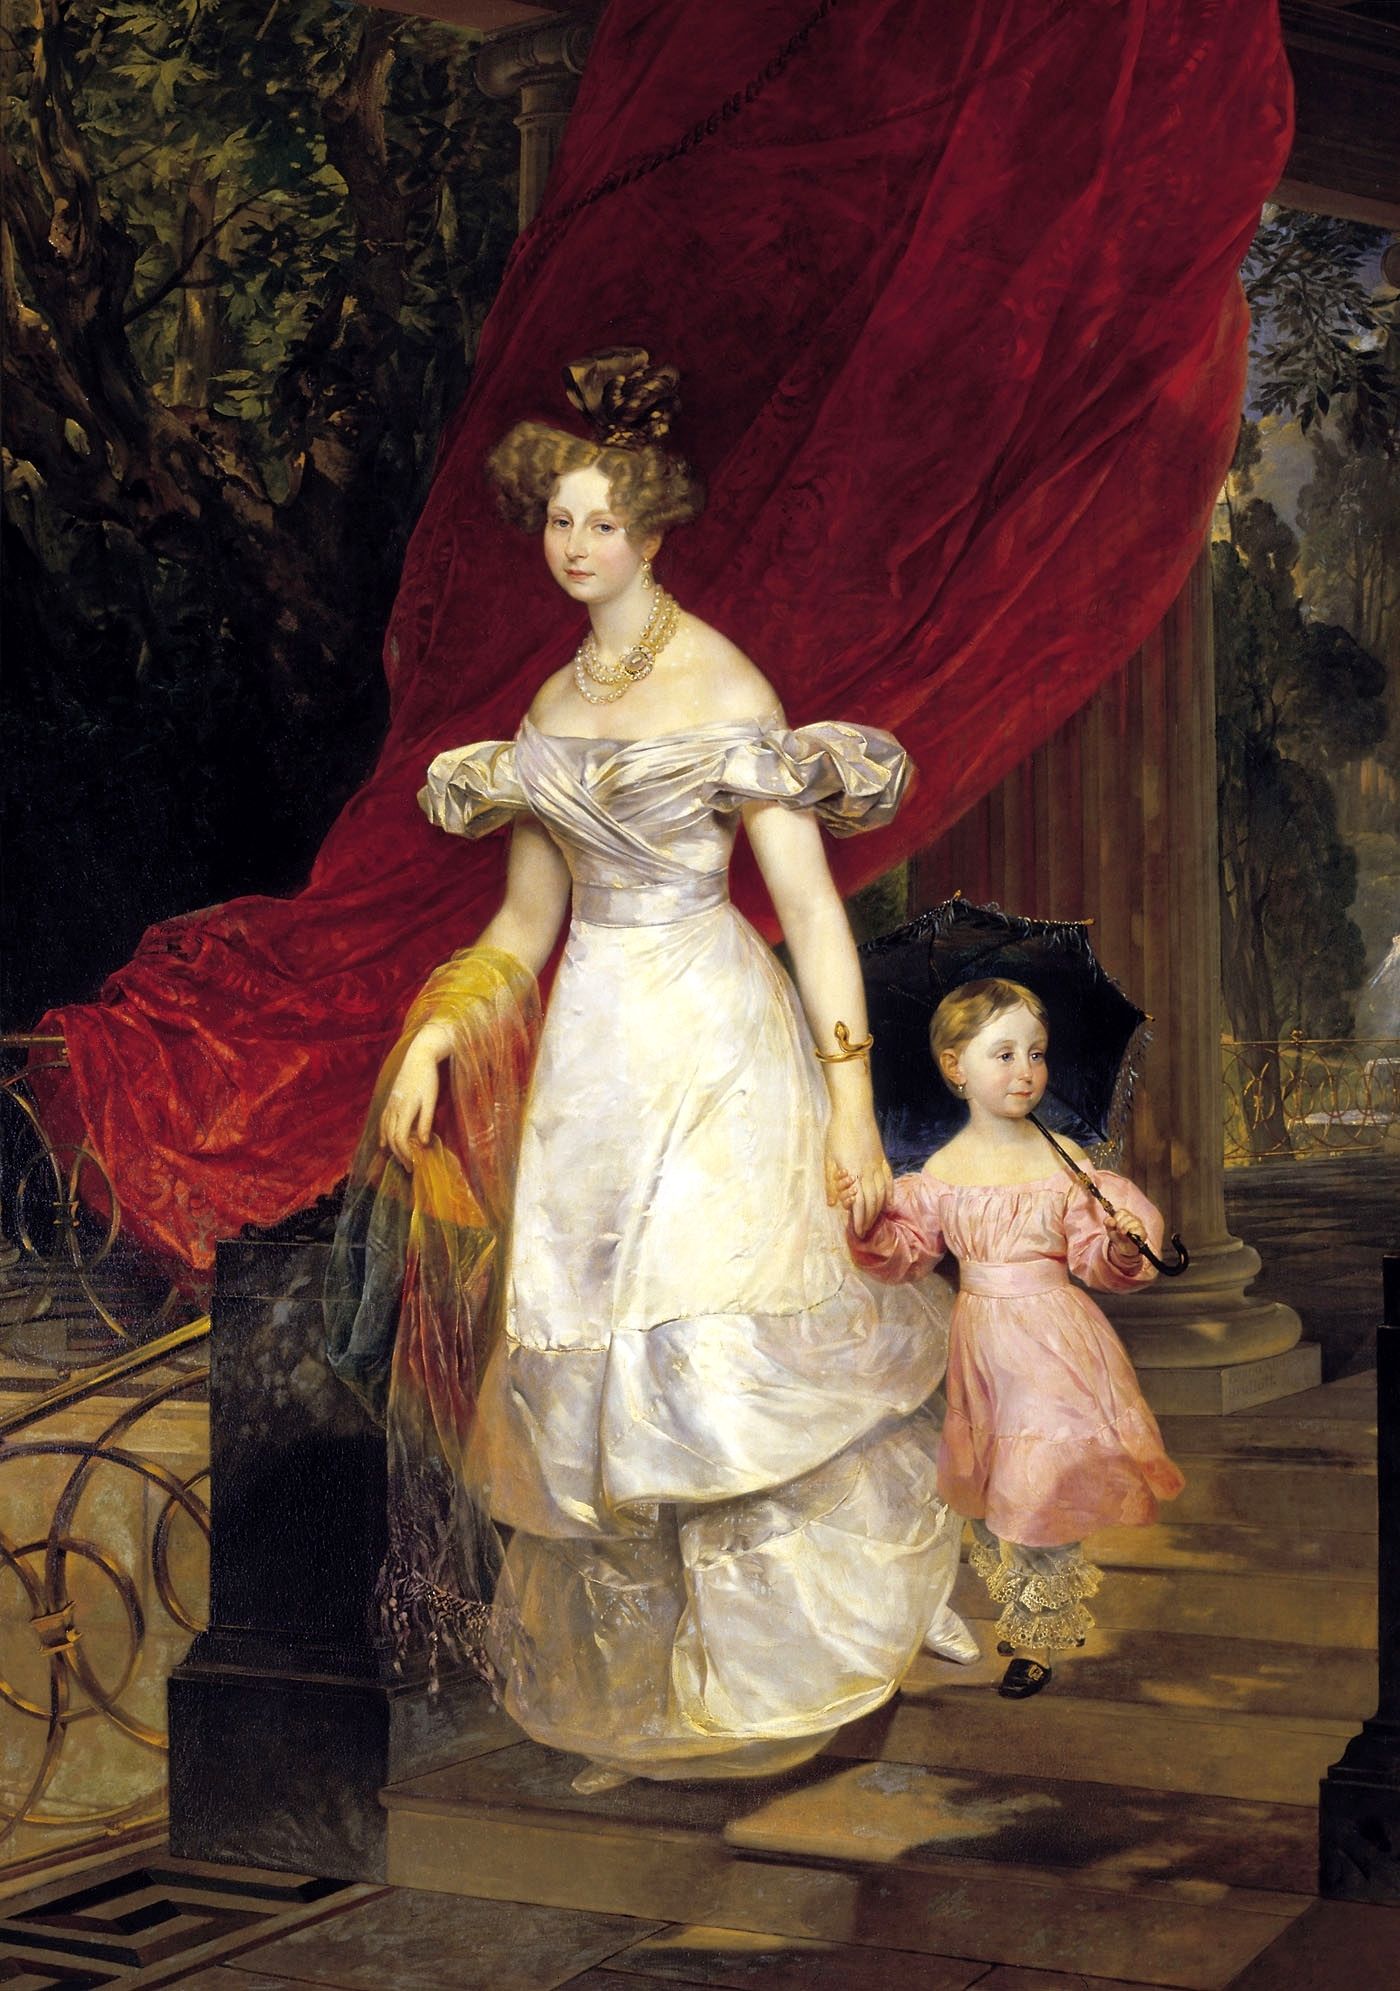 Grand Duchess Elena Pavlovna of Russia with her daughter, St. Petersburg, 1830, by Karl Brullov